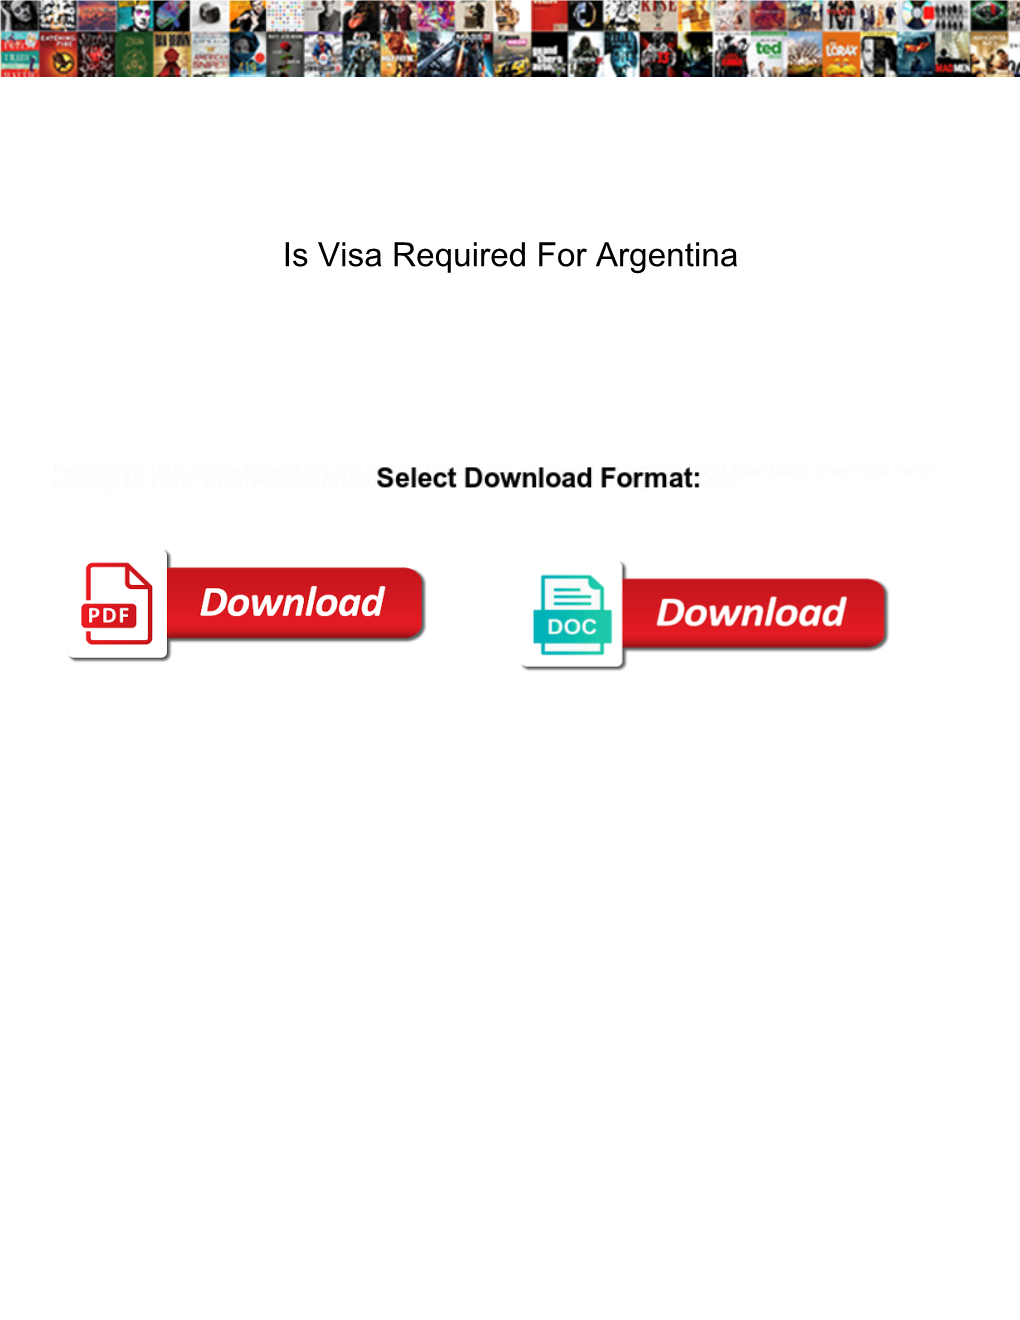 Is Visa Required for Argentina